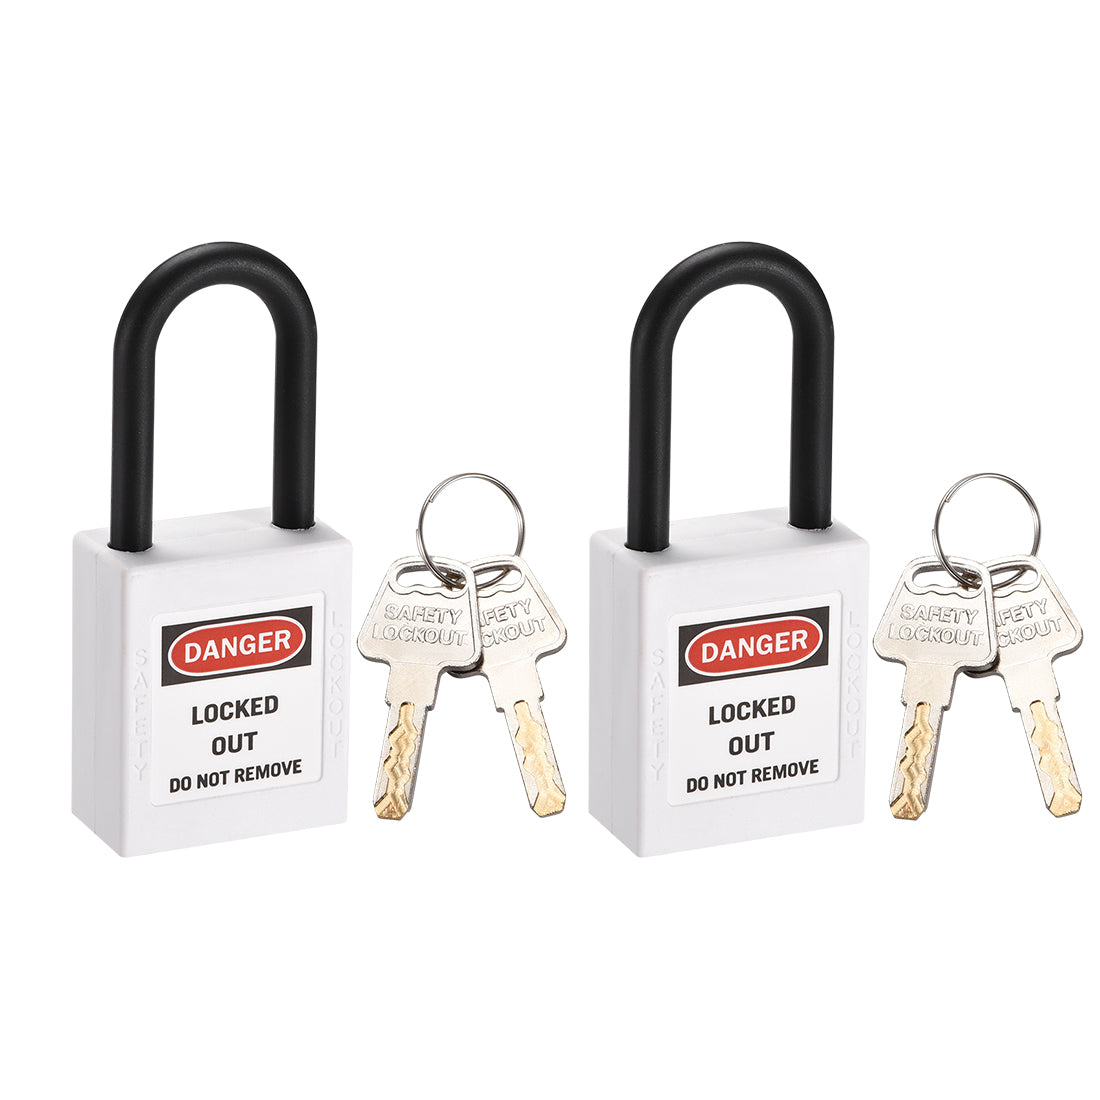 uxcell Uxcell Lockout Tagout Safety Padlock 38mm Nylon Shackle Keyed Different White 2Pcs